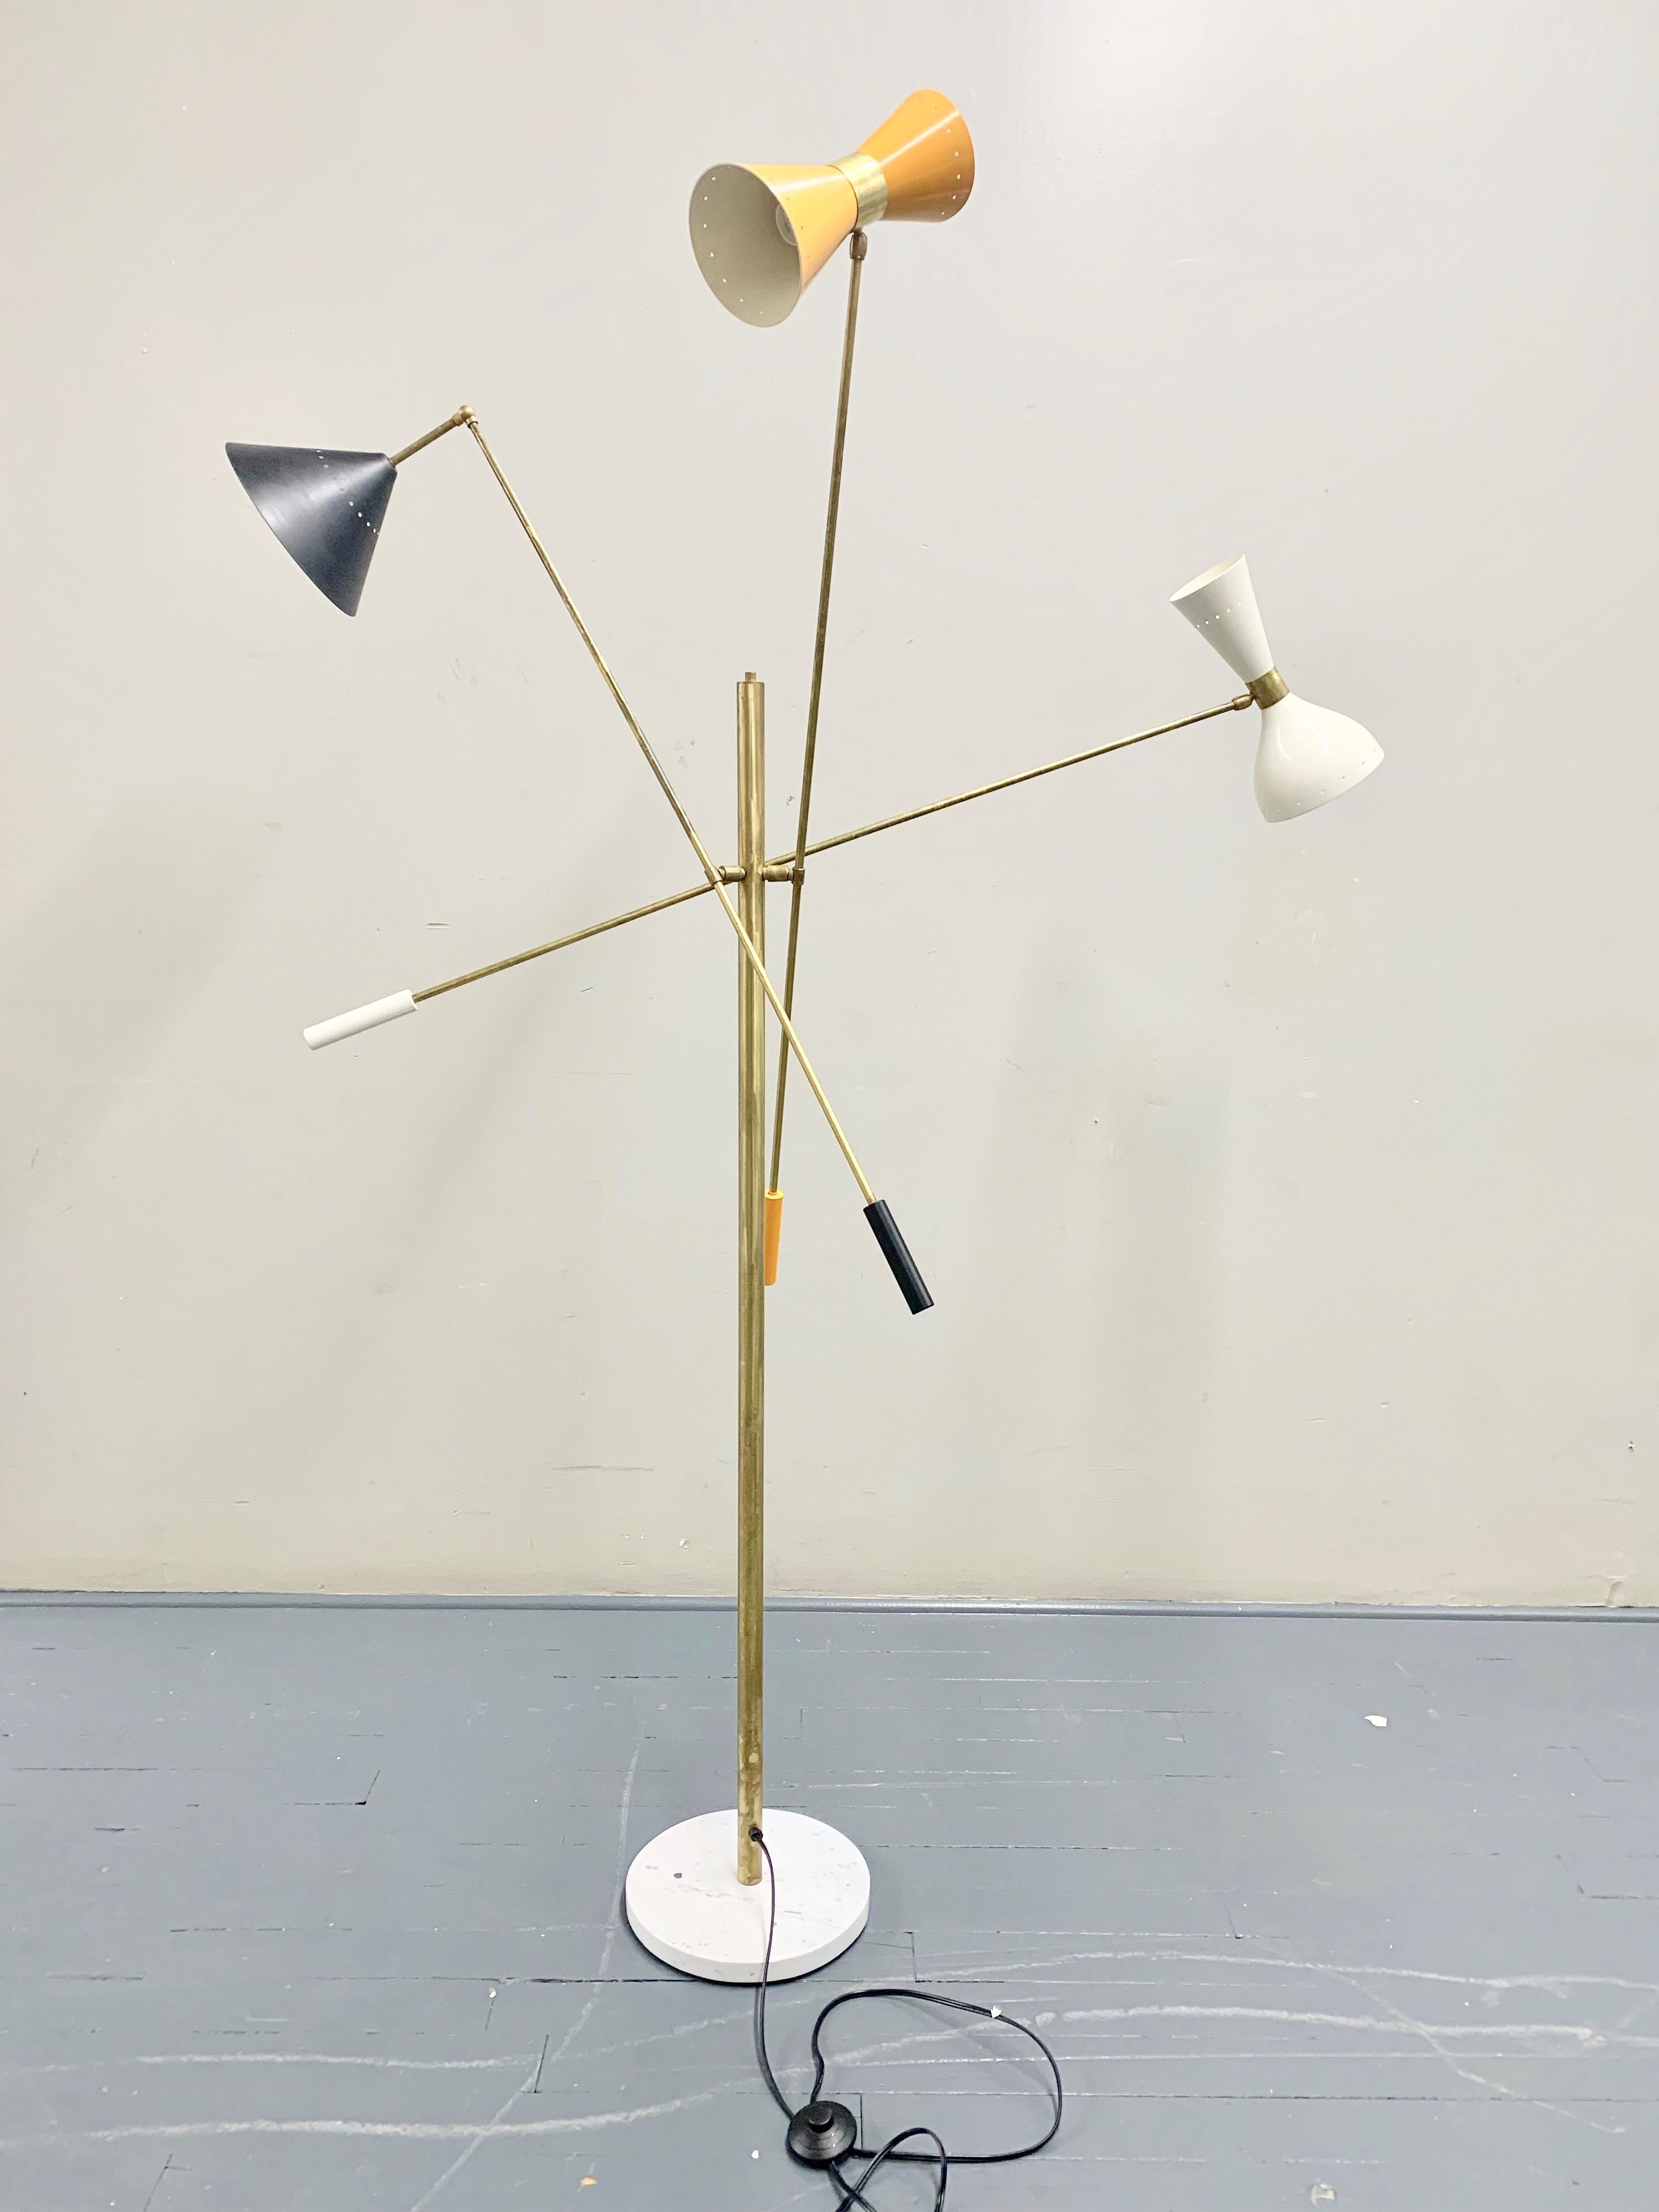 Italian midcentury style floor lamp adjustable three-arm lamp ‘Triennale’ style. Conical shades different shapes and colors, Carrara marble base, arms and body made of solid brass and hand wax painted. Each arm features counter weights of the same